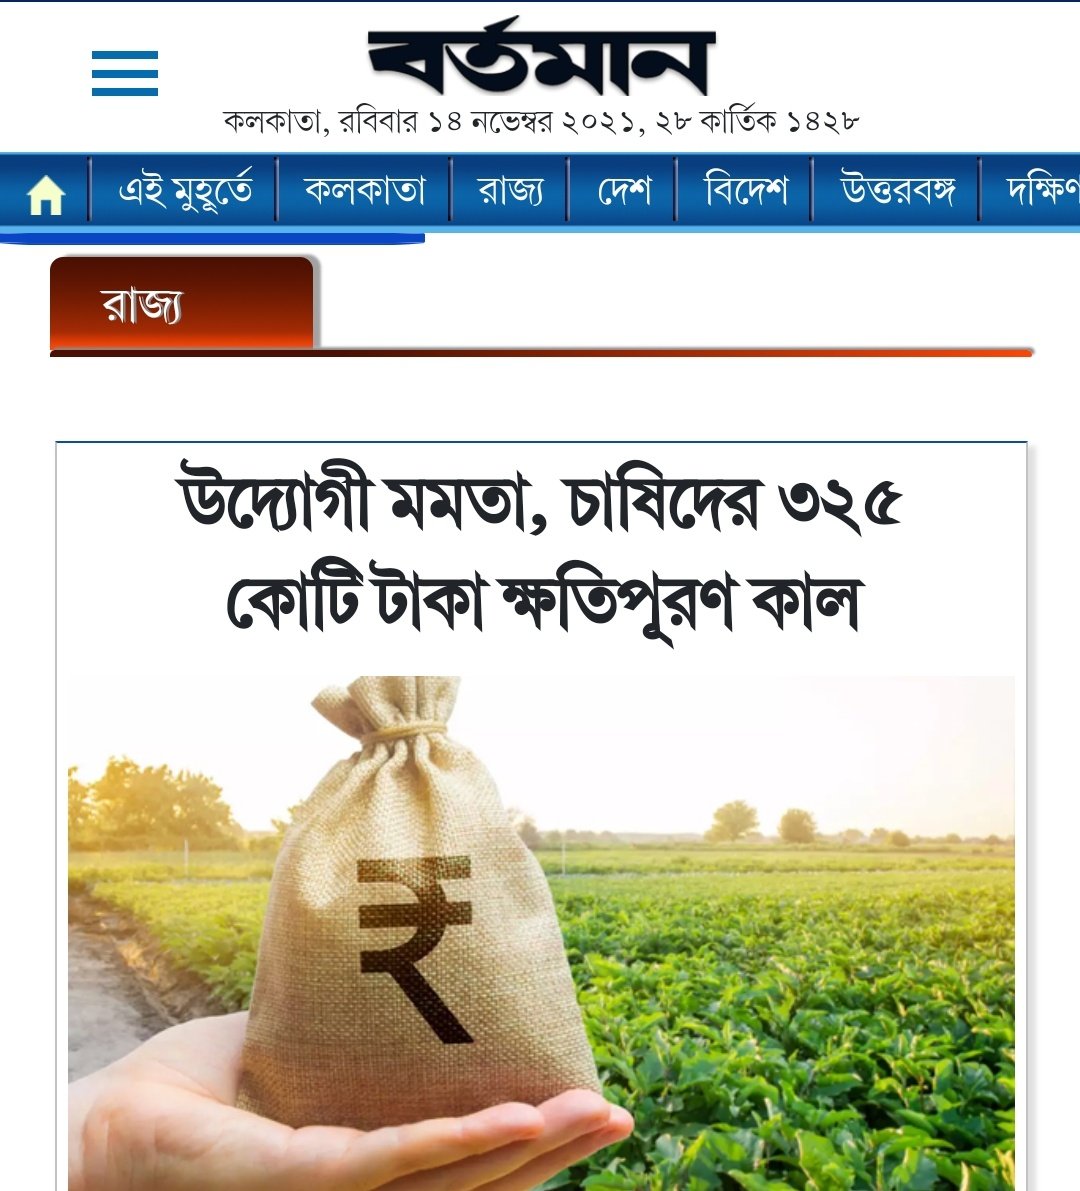 While @narendramodi doesn't give two hoots about farmers rights, 19 Lakh farmers of #Bengal to get a total of 325 Cr as crop compensation for damage posed due to #CycloneYaas in the last Rabi-Boro season of May. 110 Cr has already been disbursed, rest to be done by Monday.